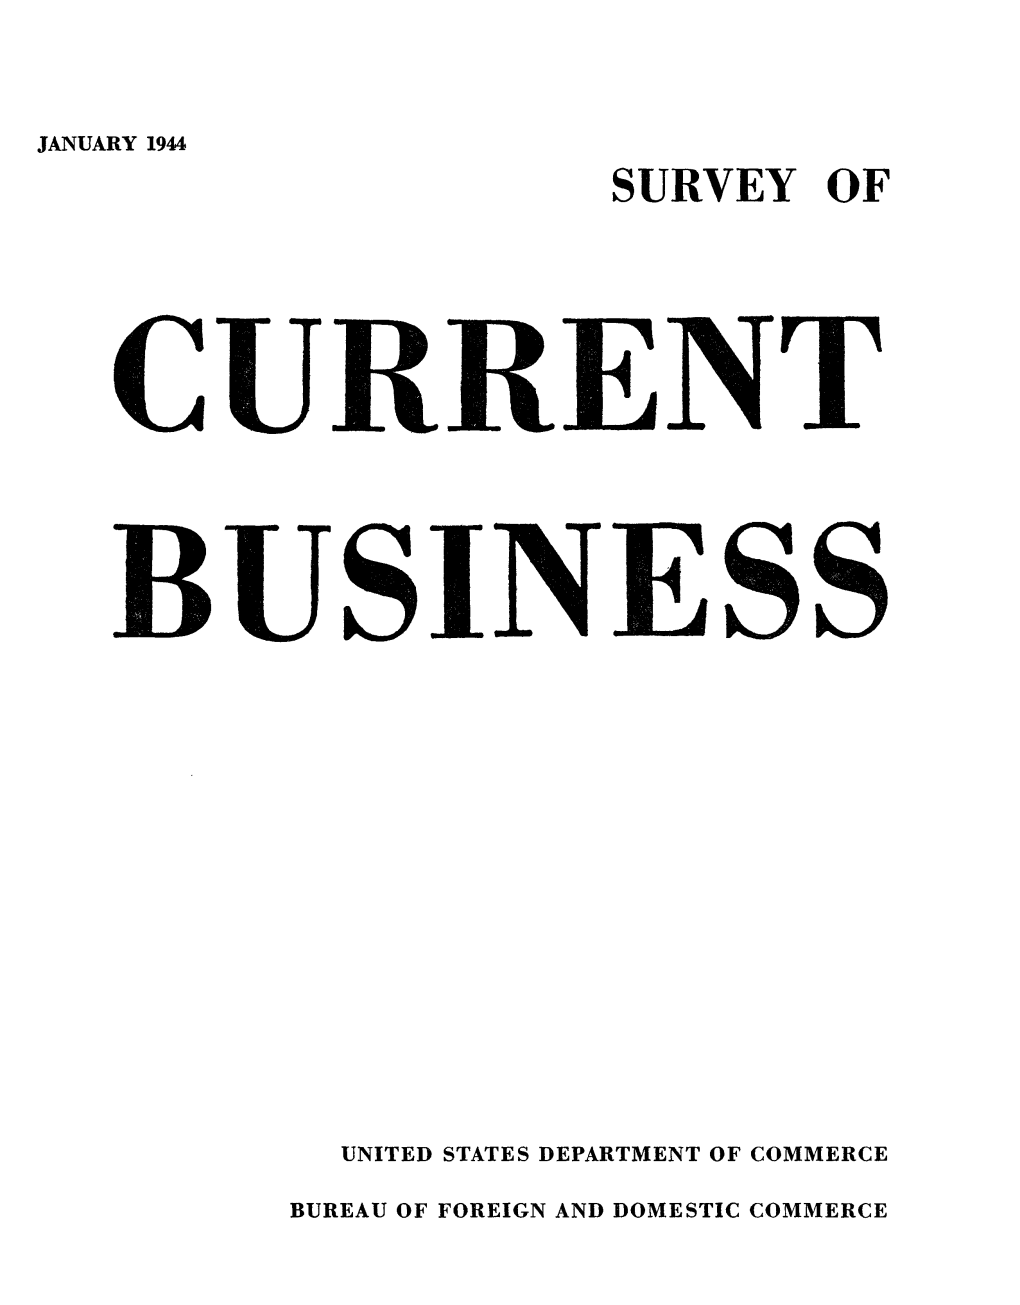 SURVEY of CURRENT BUSINESS January 1944